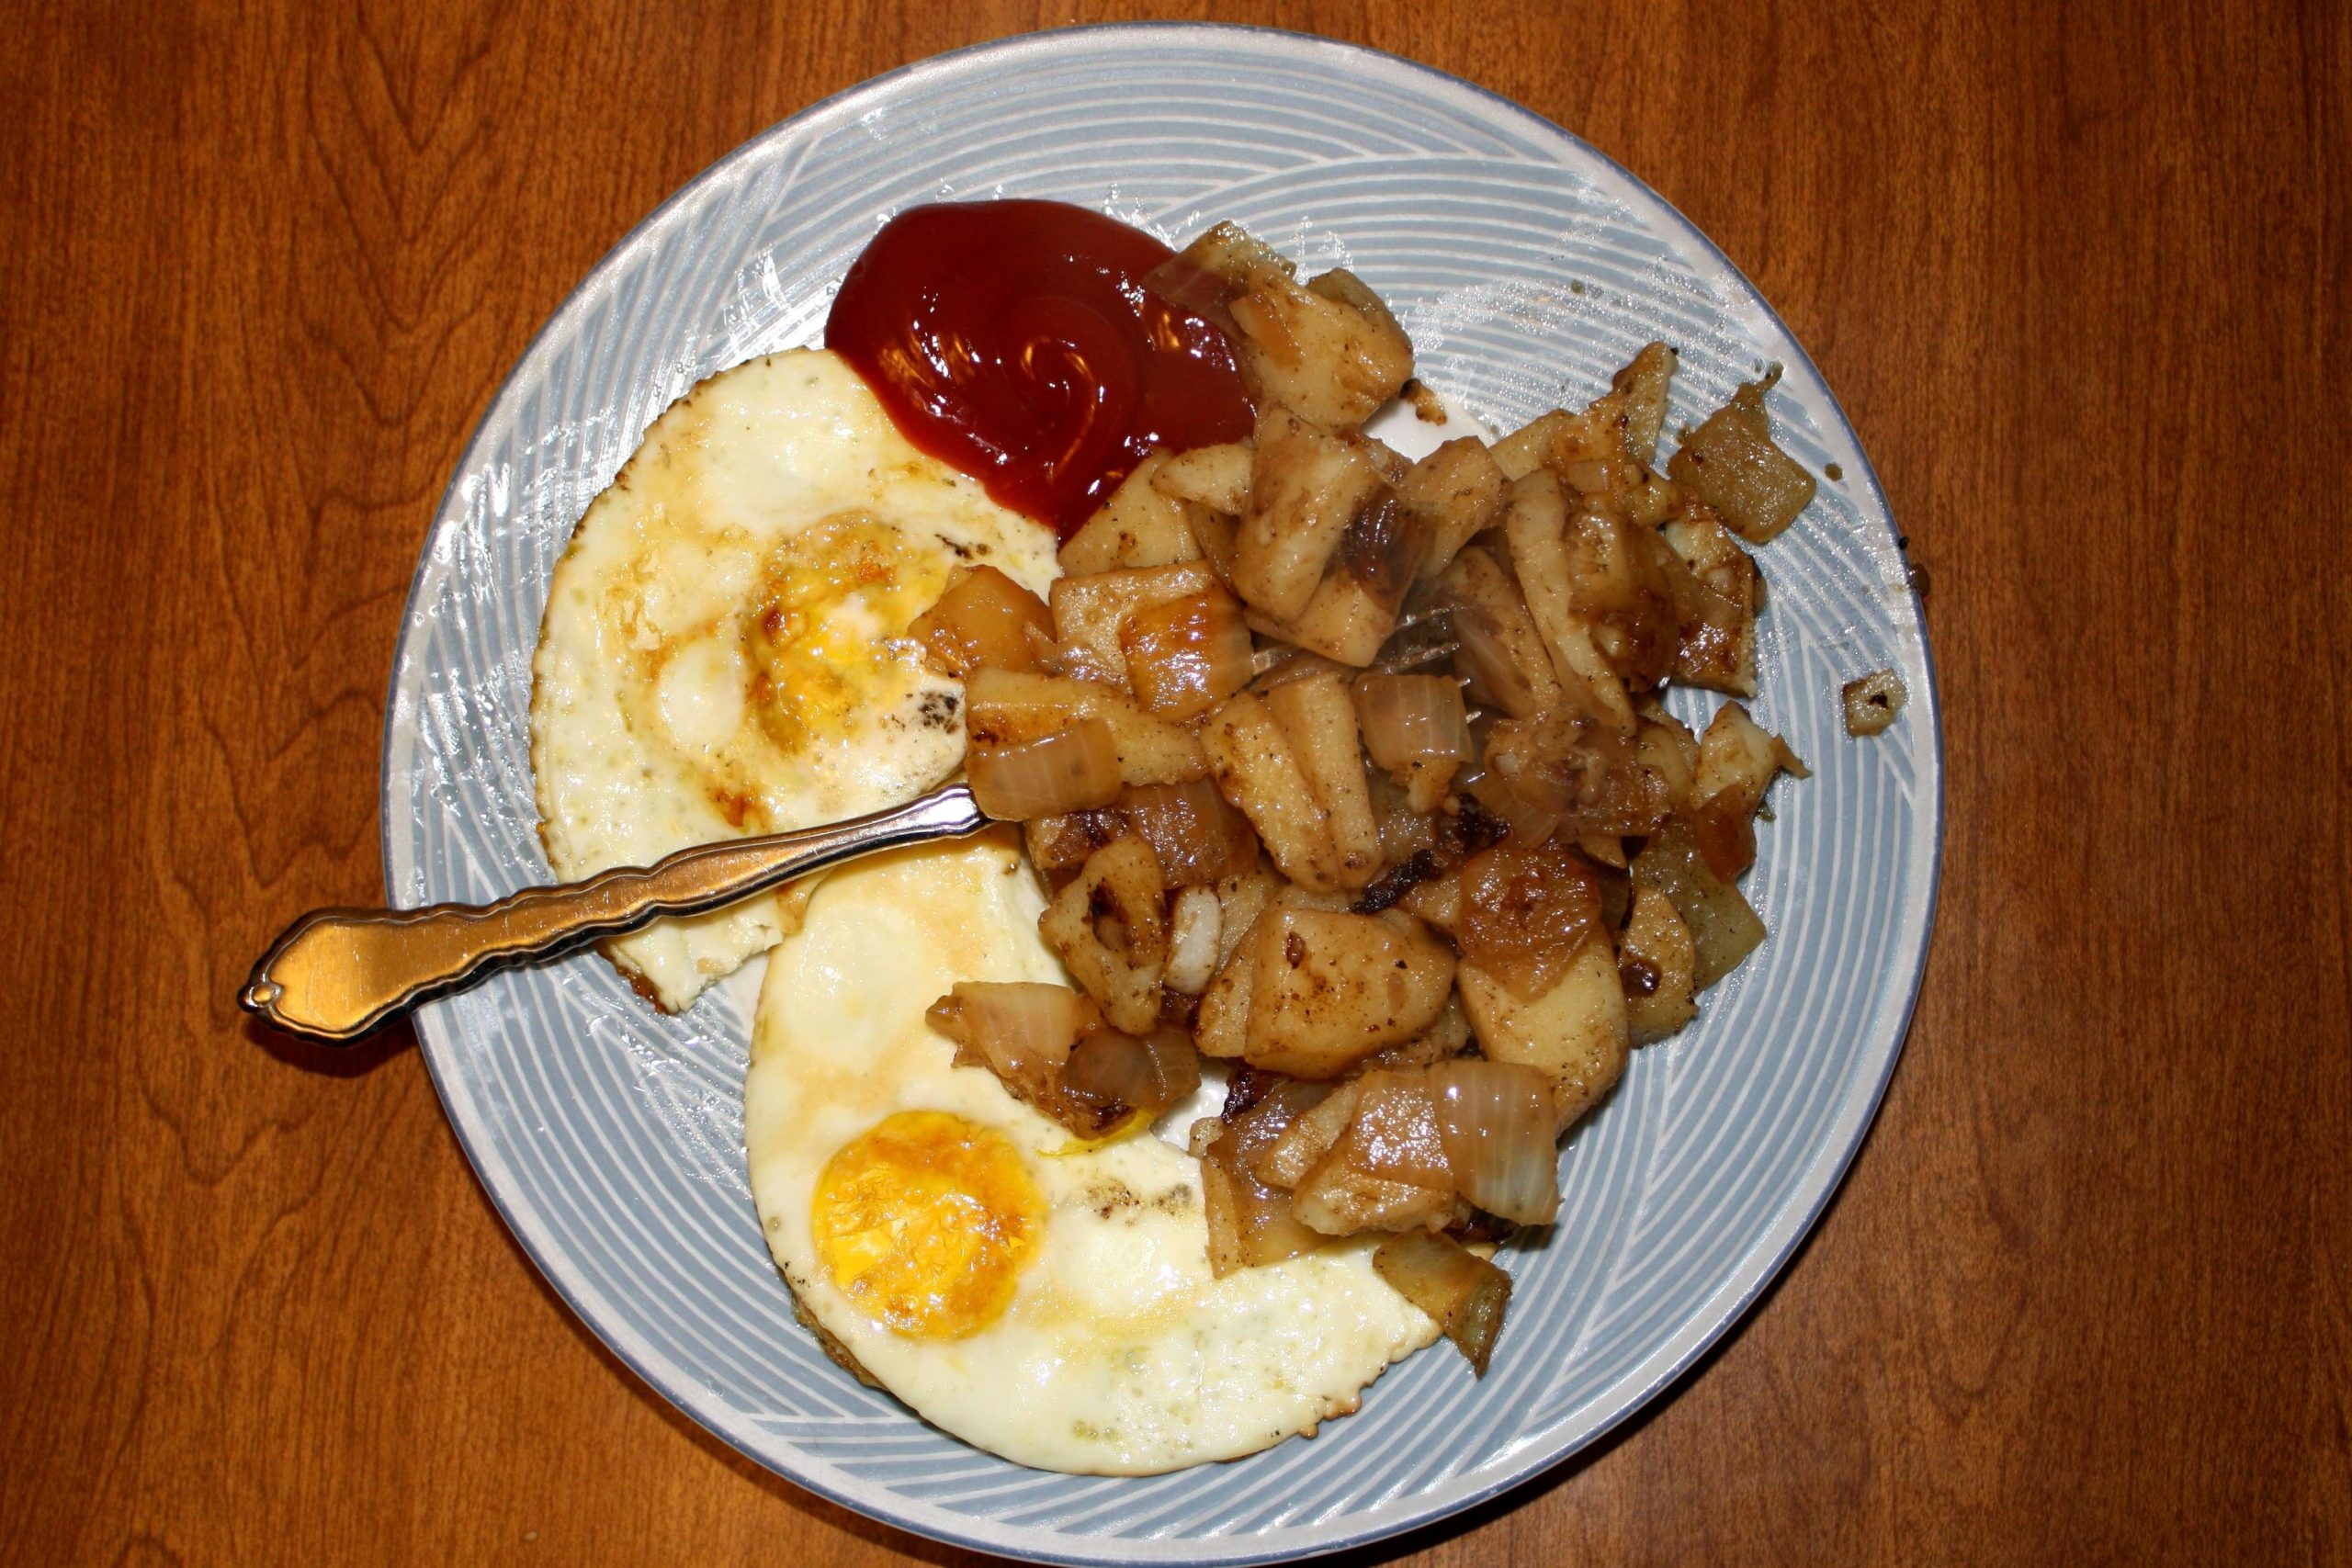 fried-eggs-home-fries-potatoes-with-ketchup